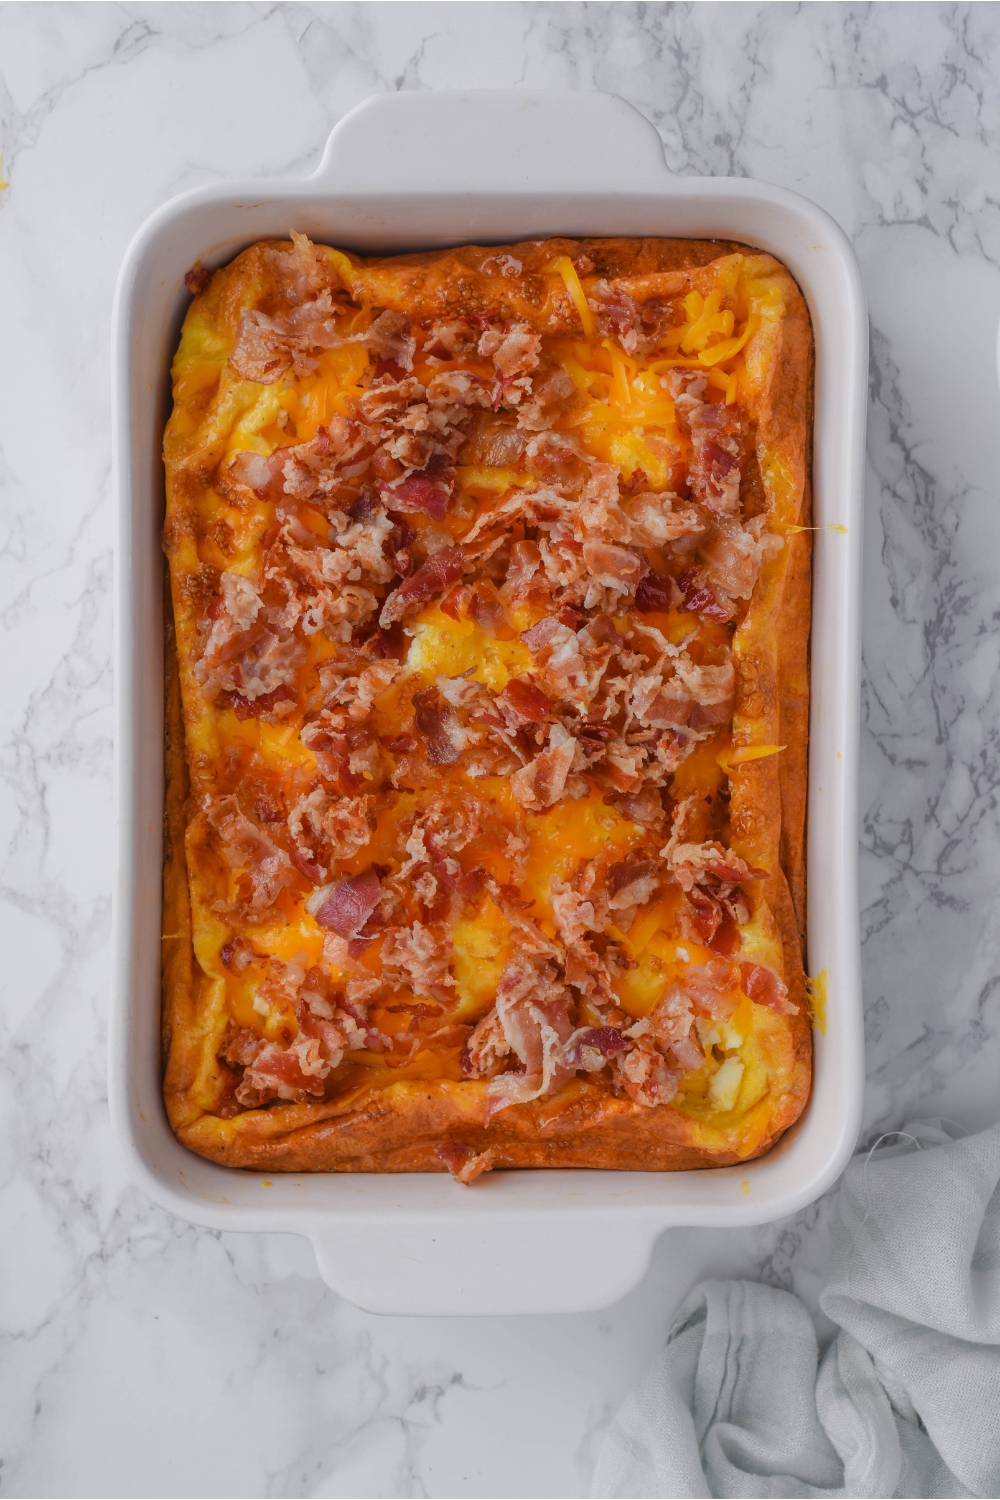 Overhead view of a breakfast casserole that has been topped with crumbled bacon.